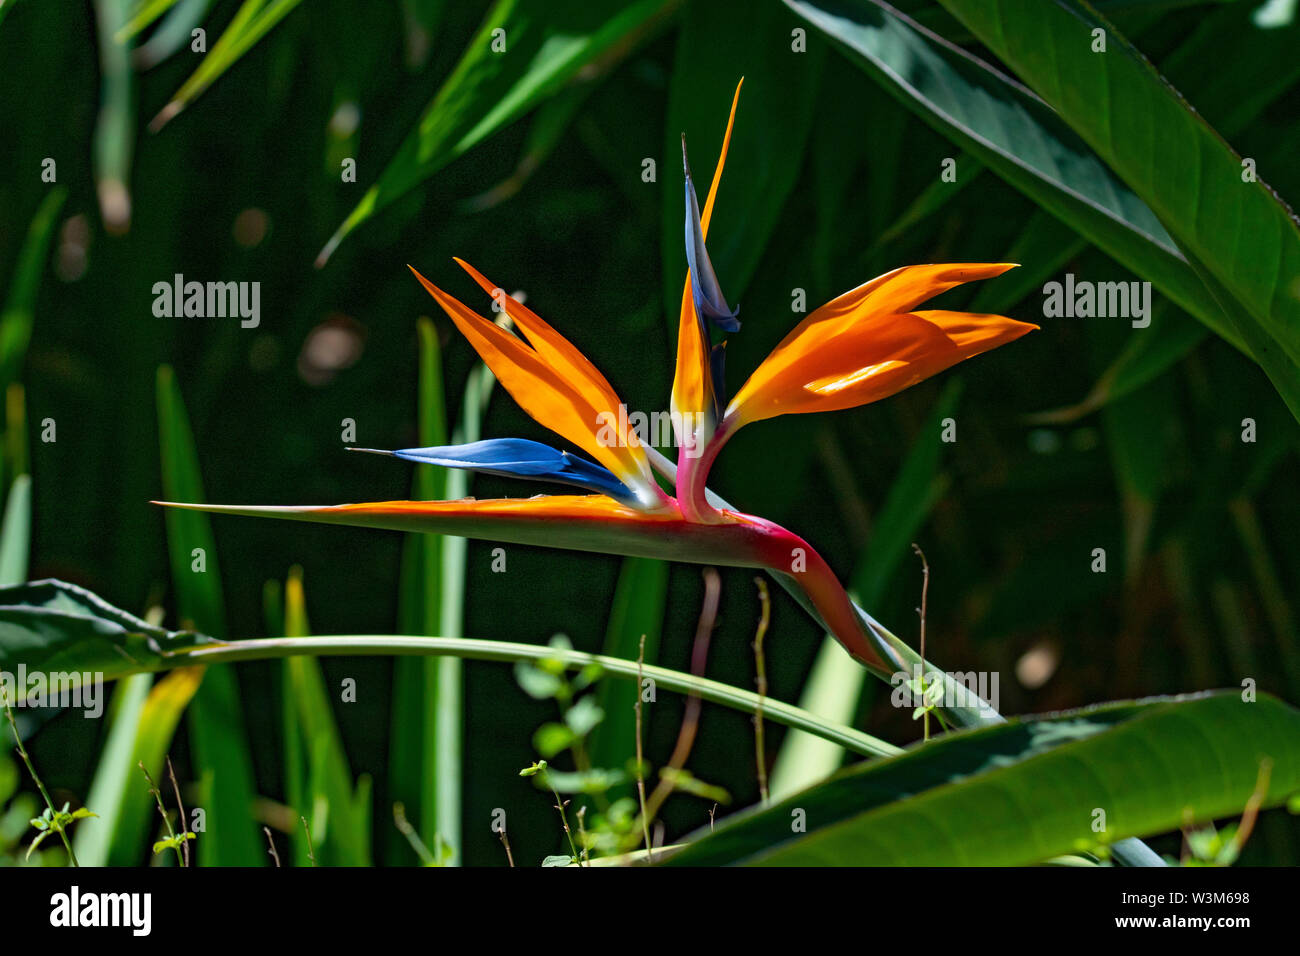 Bird of Paradise flower image taken in a garden setting against a leafy green background Stock Photo